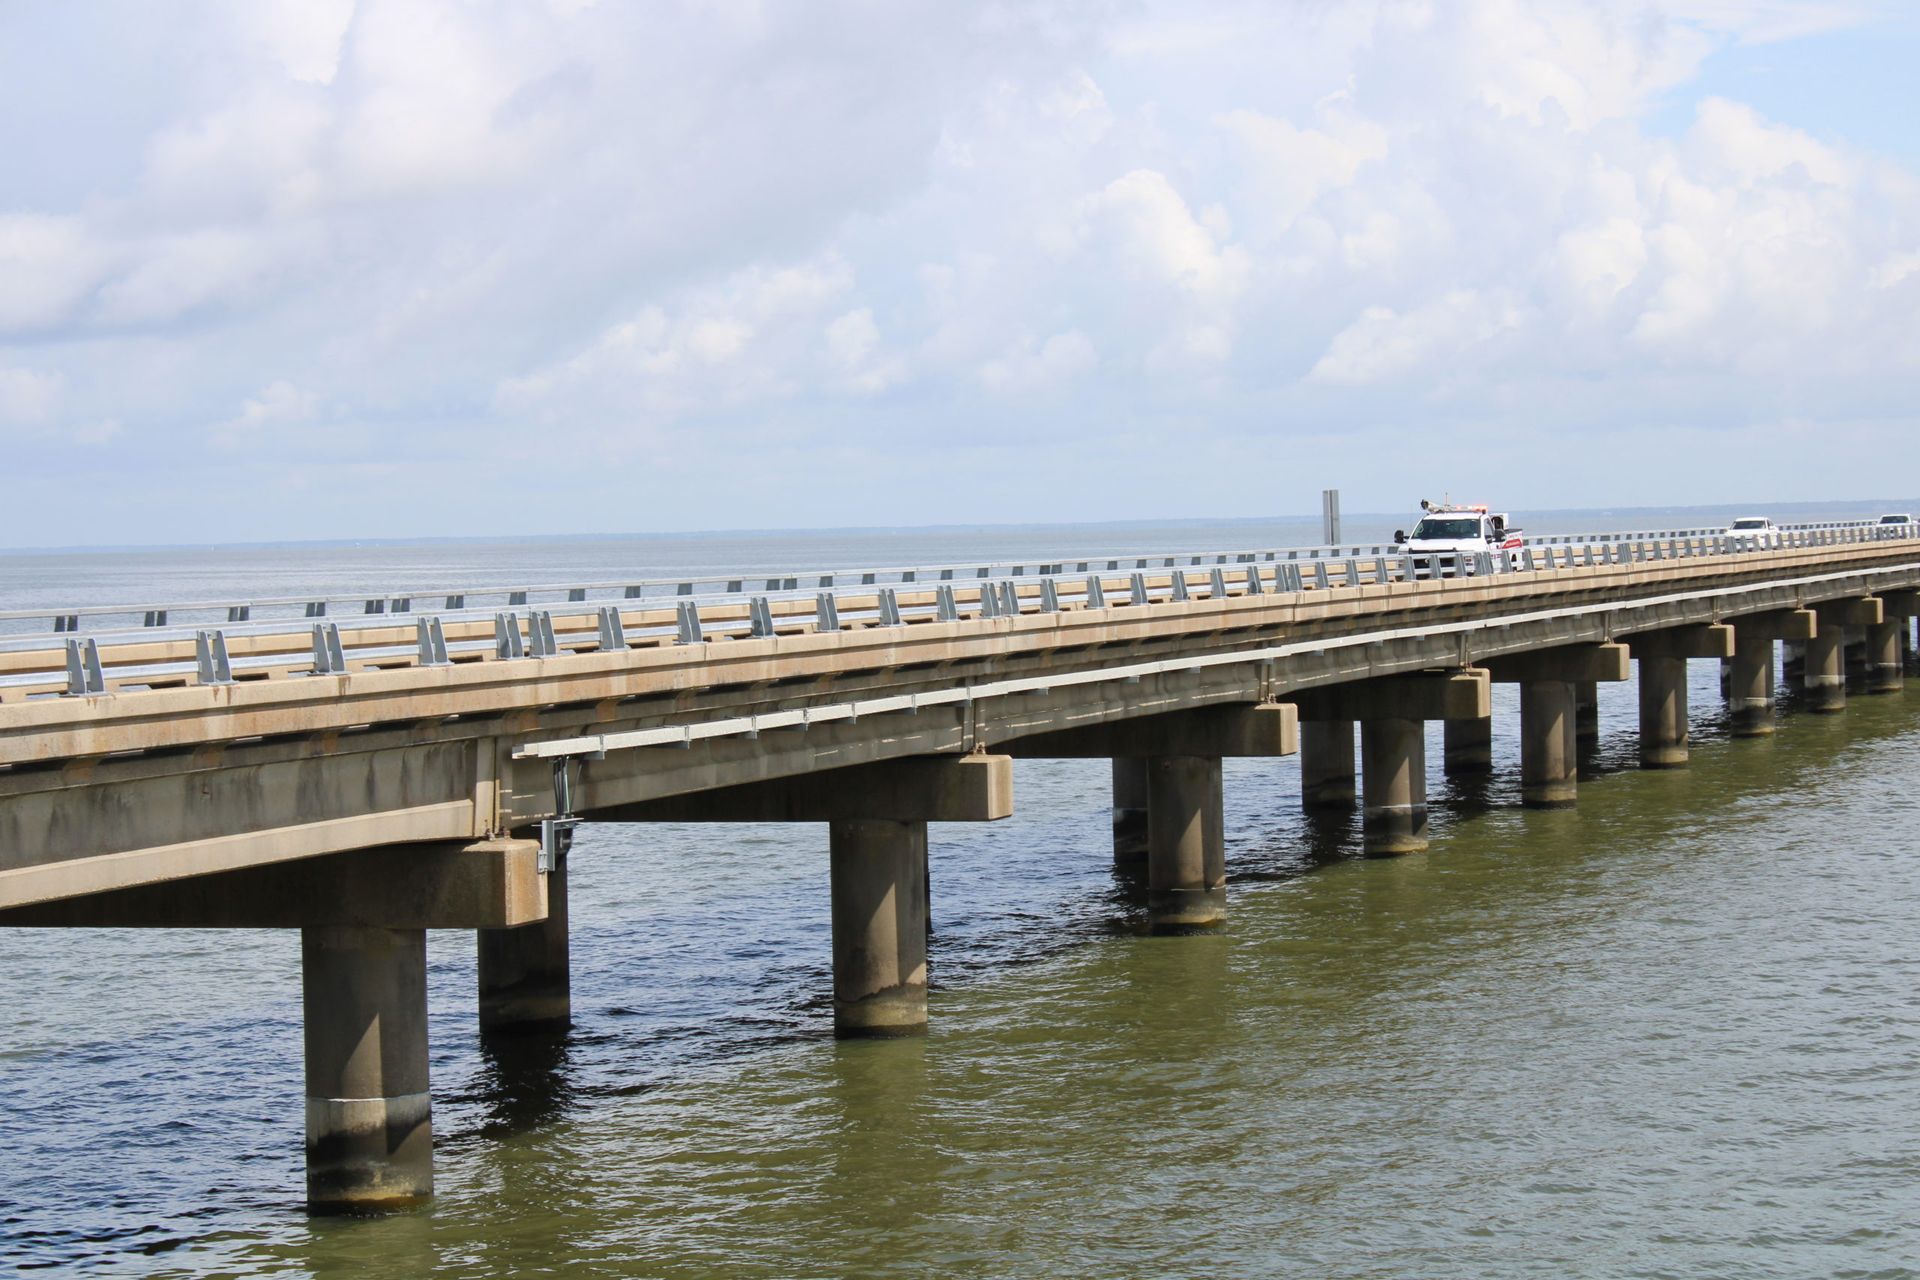  World's longest continuous bridge over water: world record near New Orleans, Louisiana